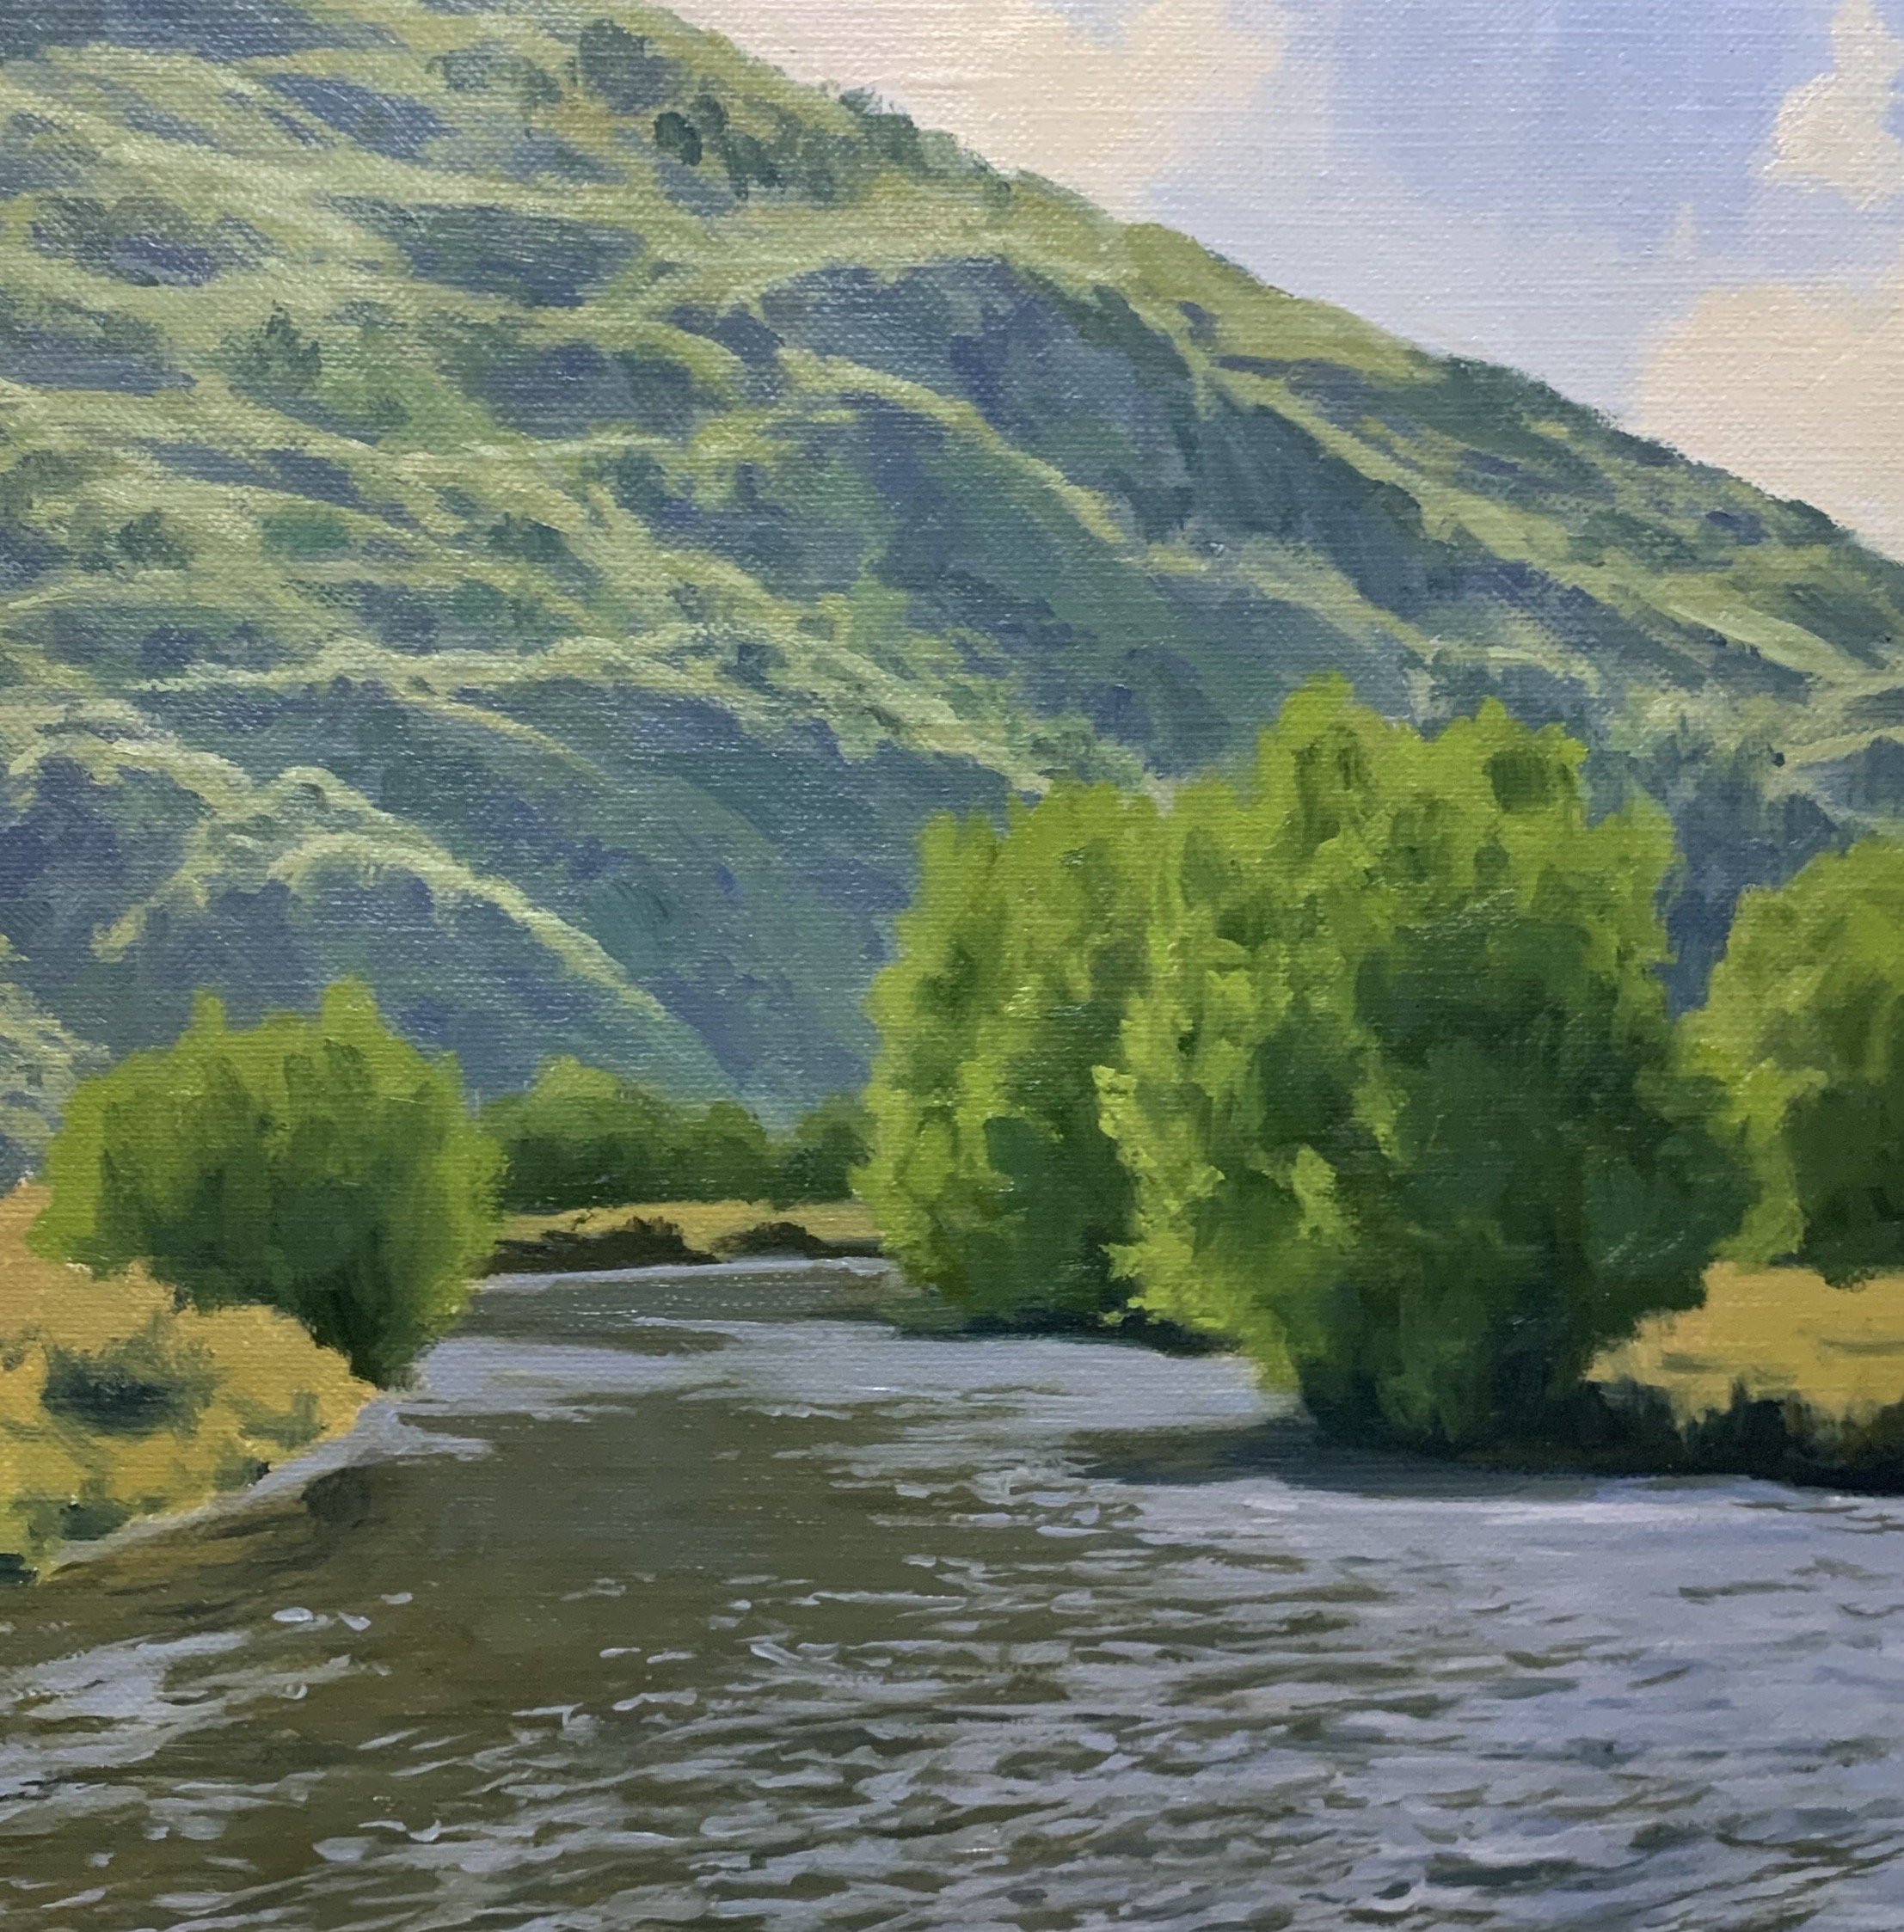 A Beginner's Guide to Plein Air Painting; Tips for Success